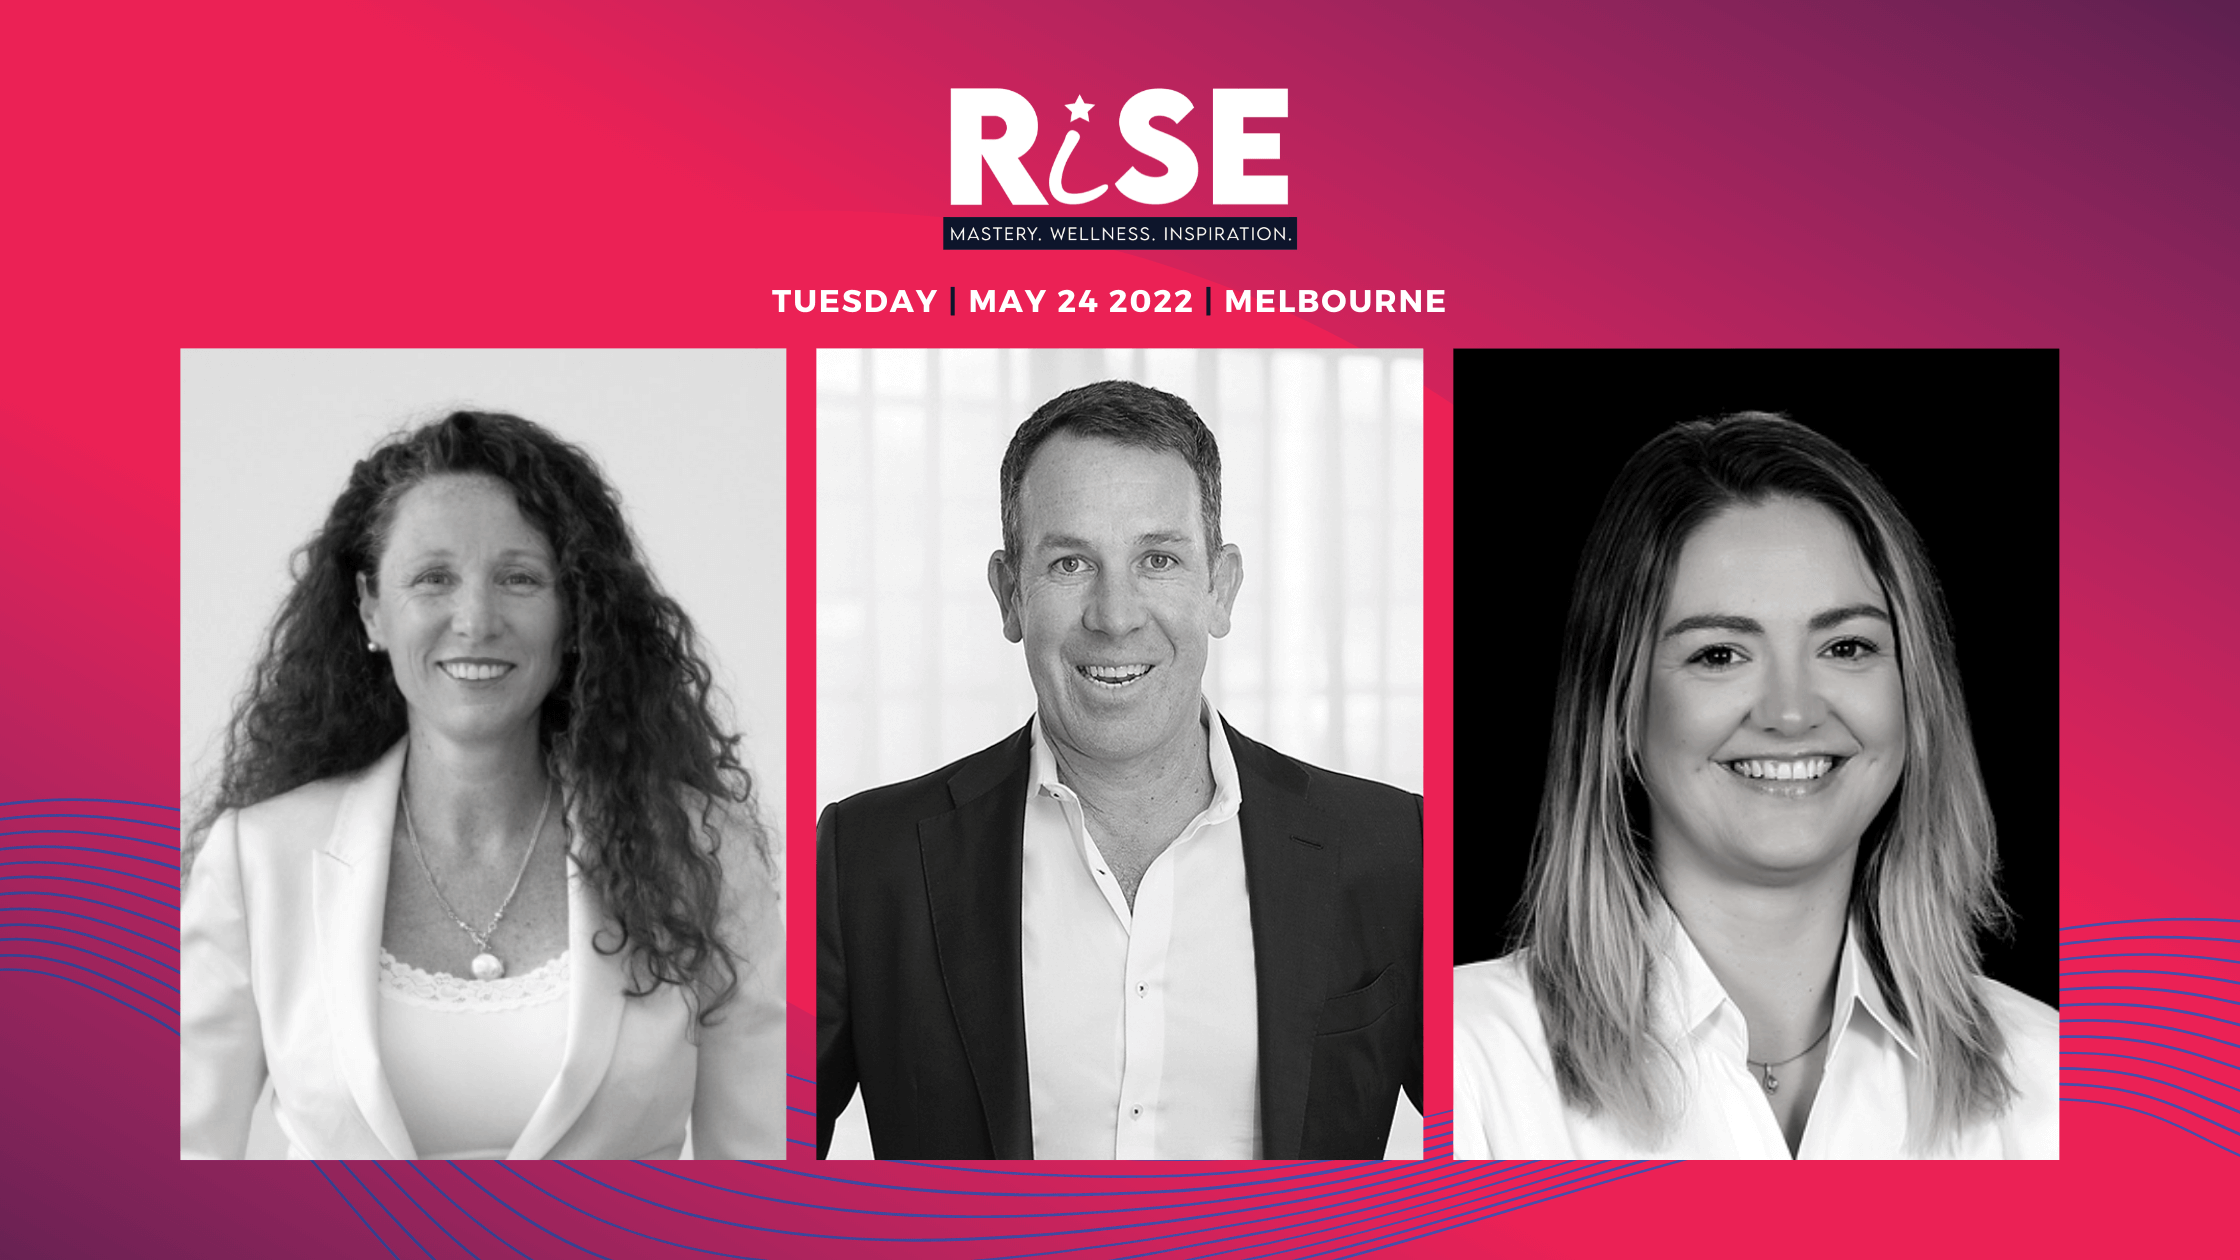 Fabulous female speakers lead the Rise2022 lineup